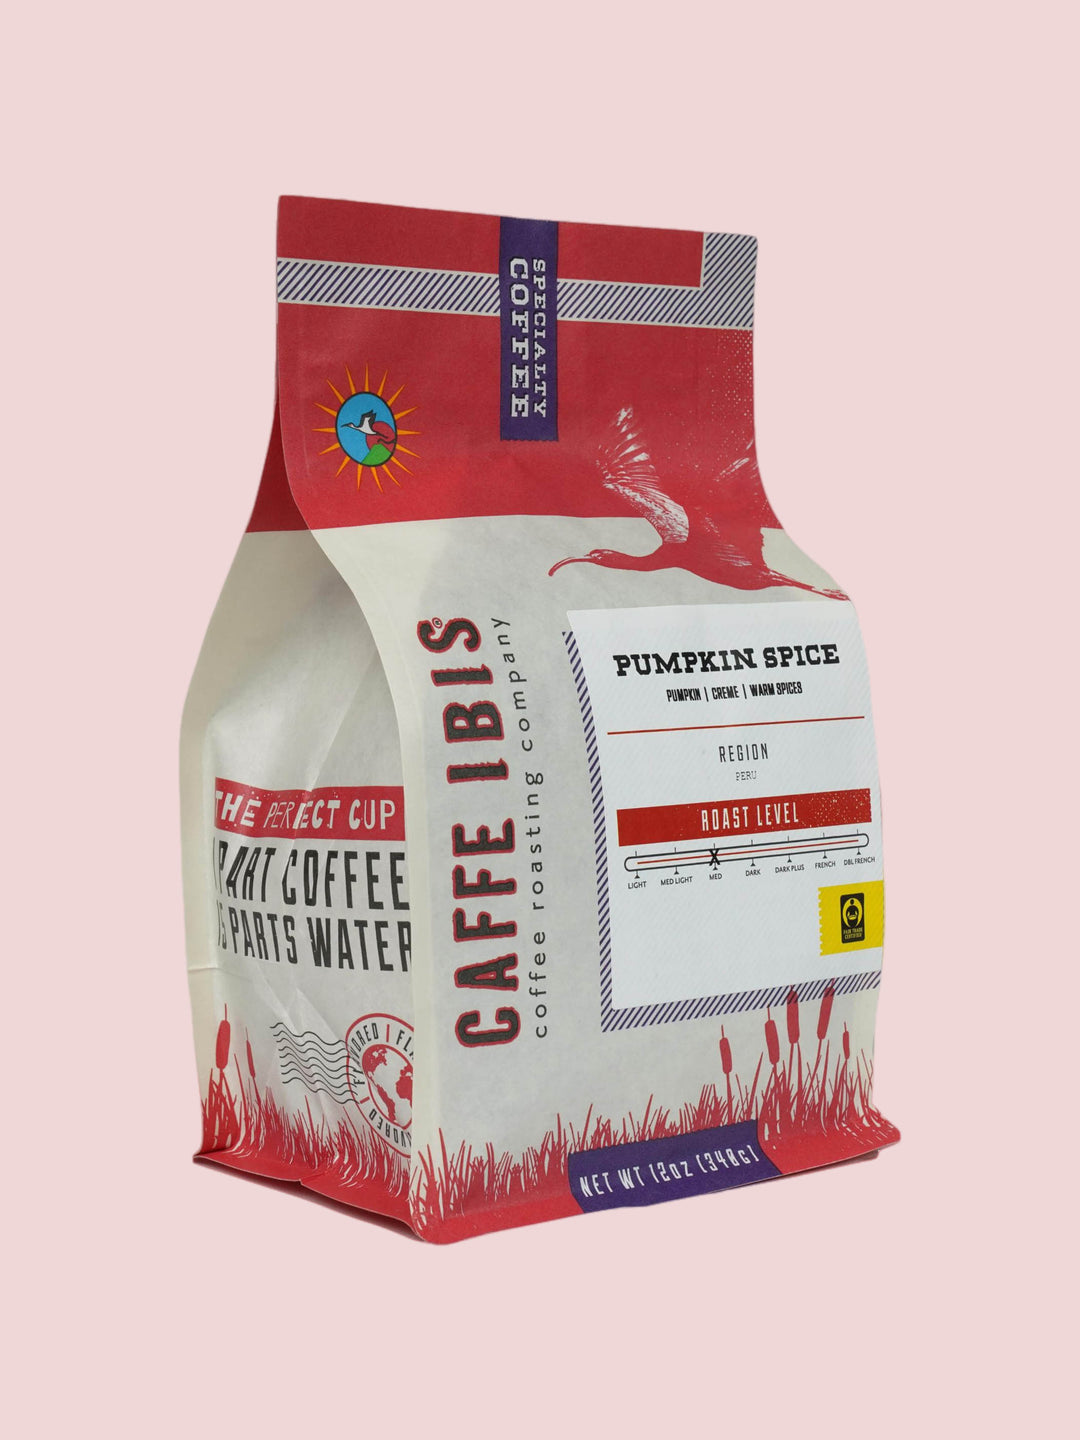 Caffe Ibis seasonal flavored Pumpkin Spice coffee in a pink twelve ounce bag; front quarter view.